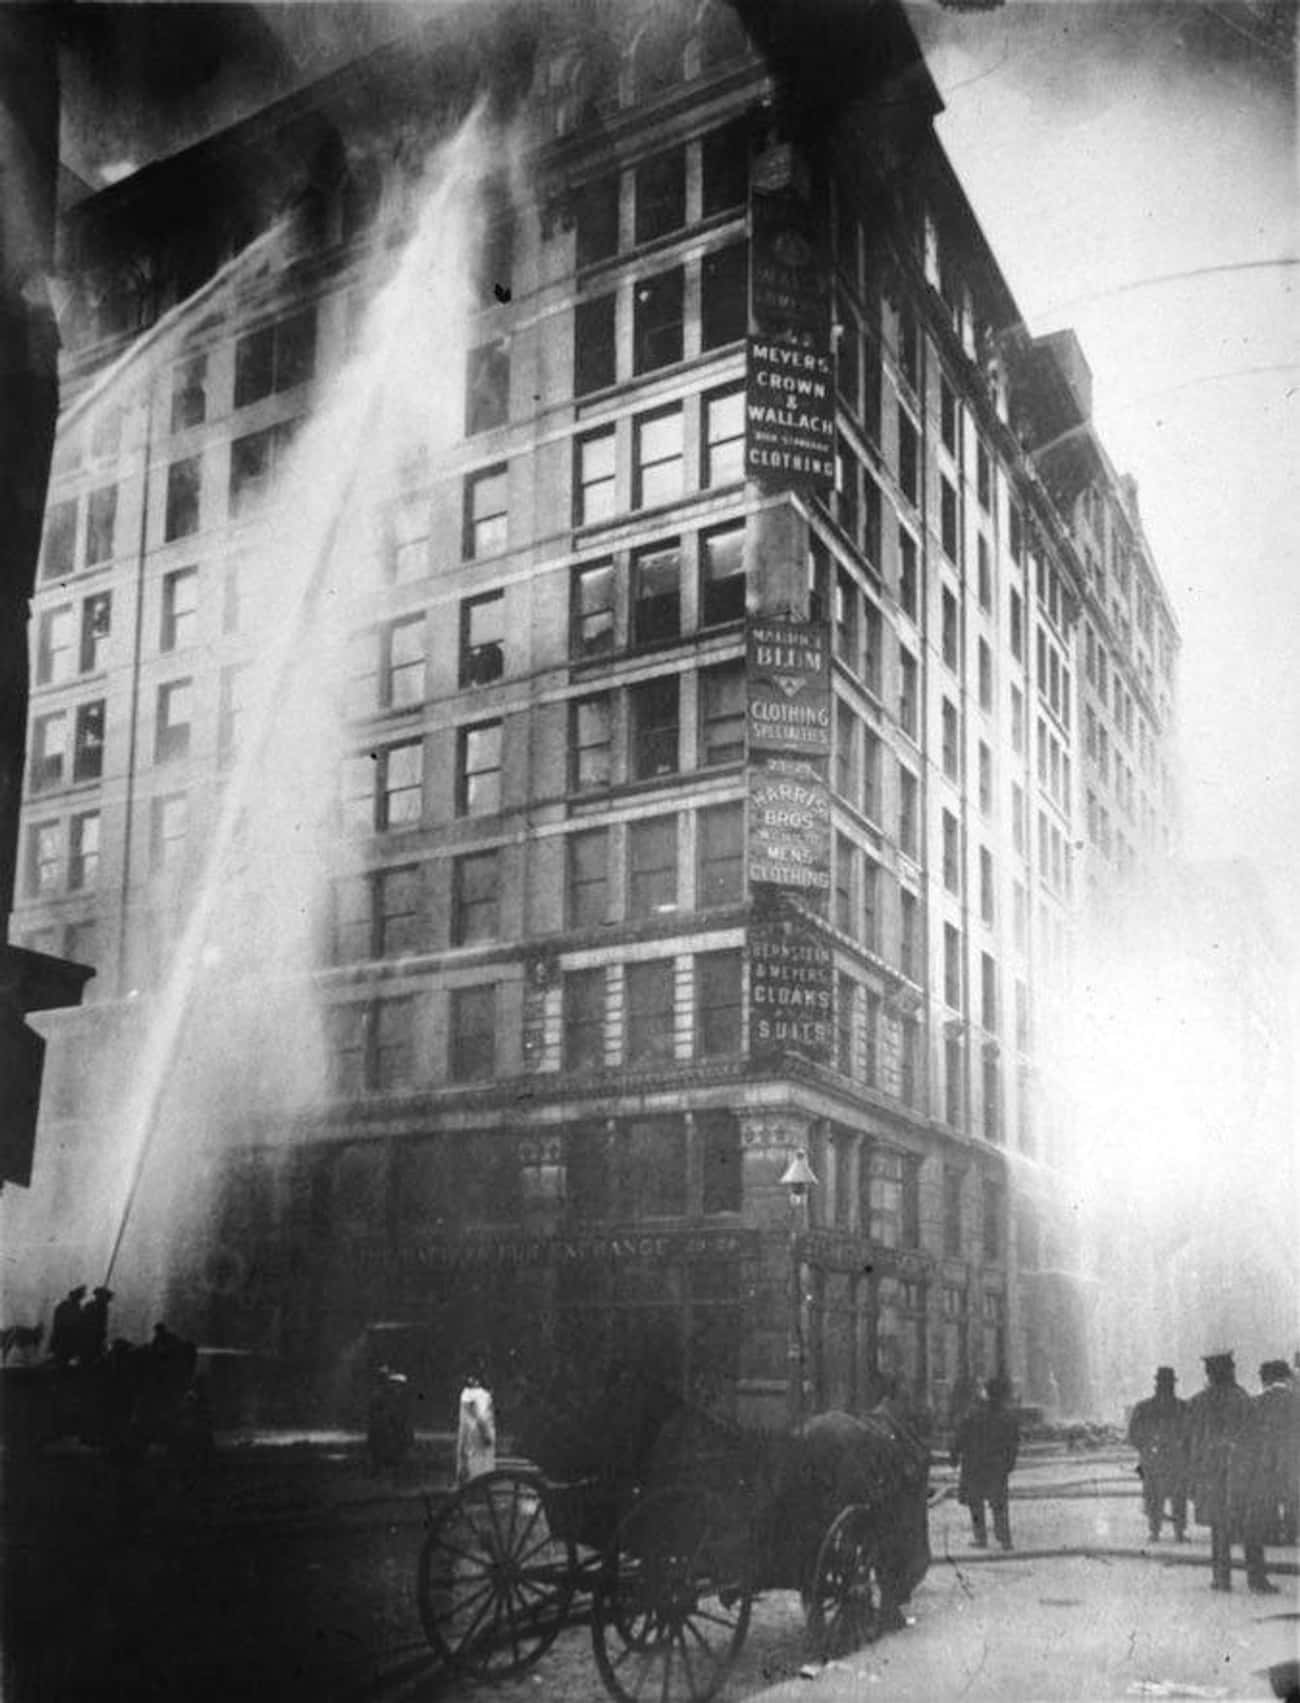 The Triangle Shirtwaist Factory Fire Triggered An Avalanche Of Worker Protection Laws